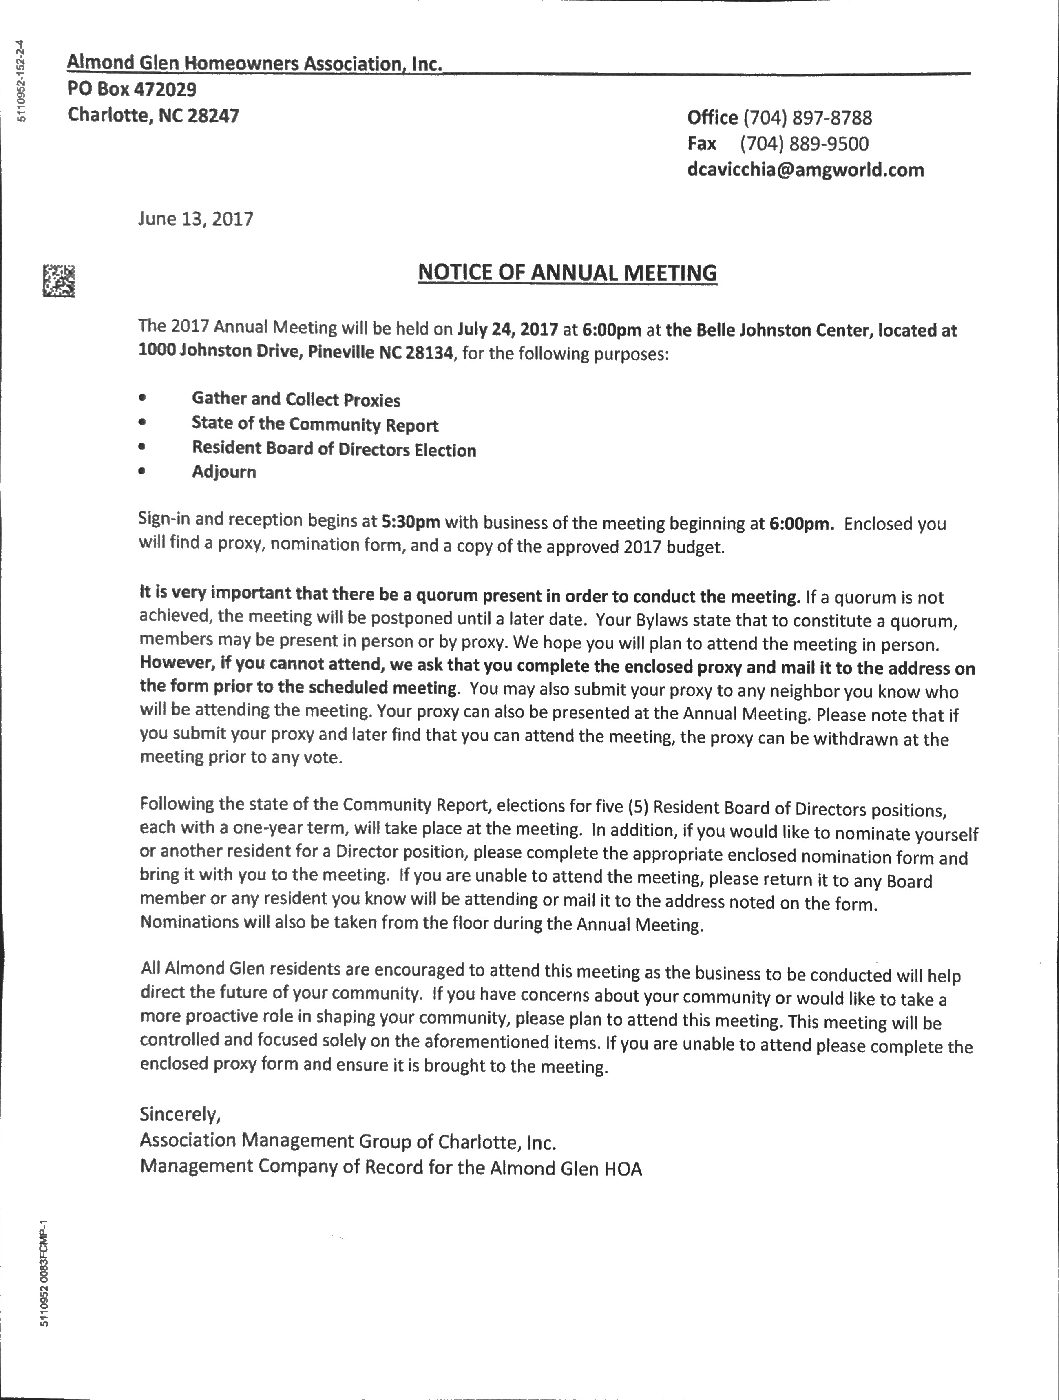 2017 Notice of Annual Meeting